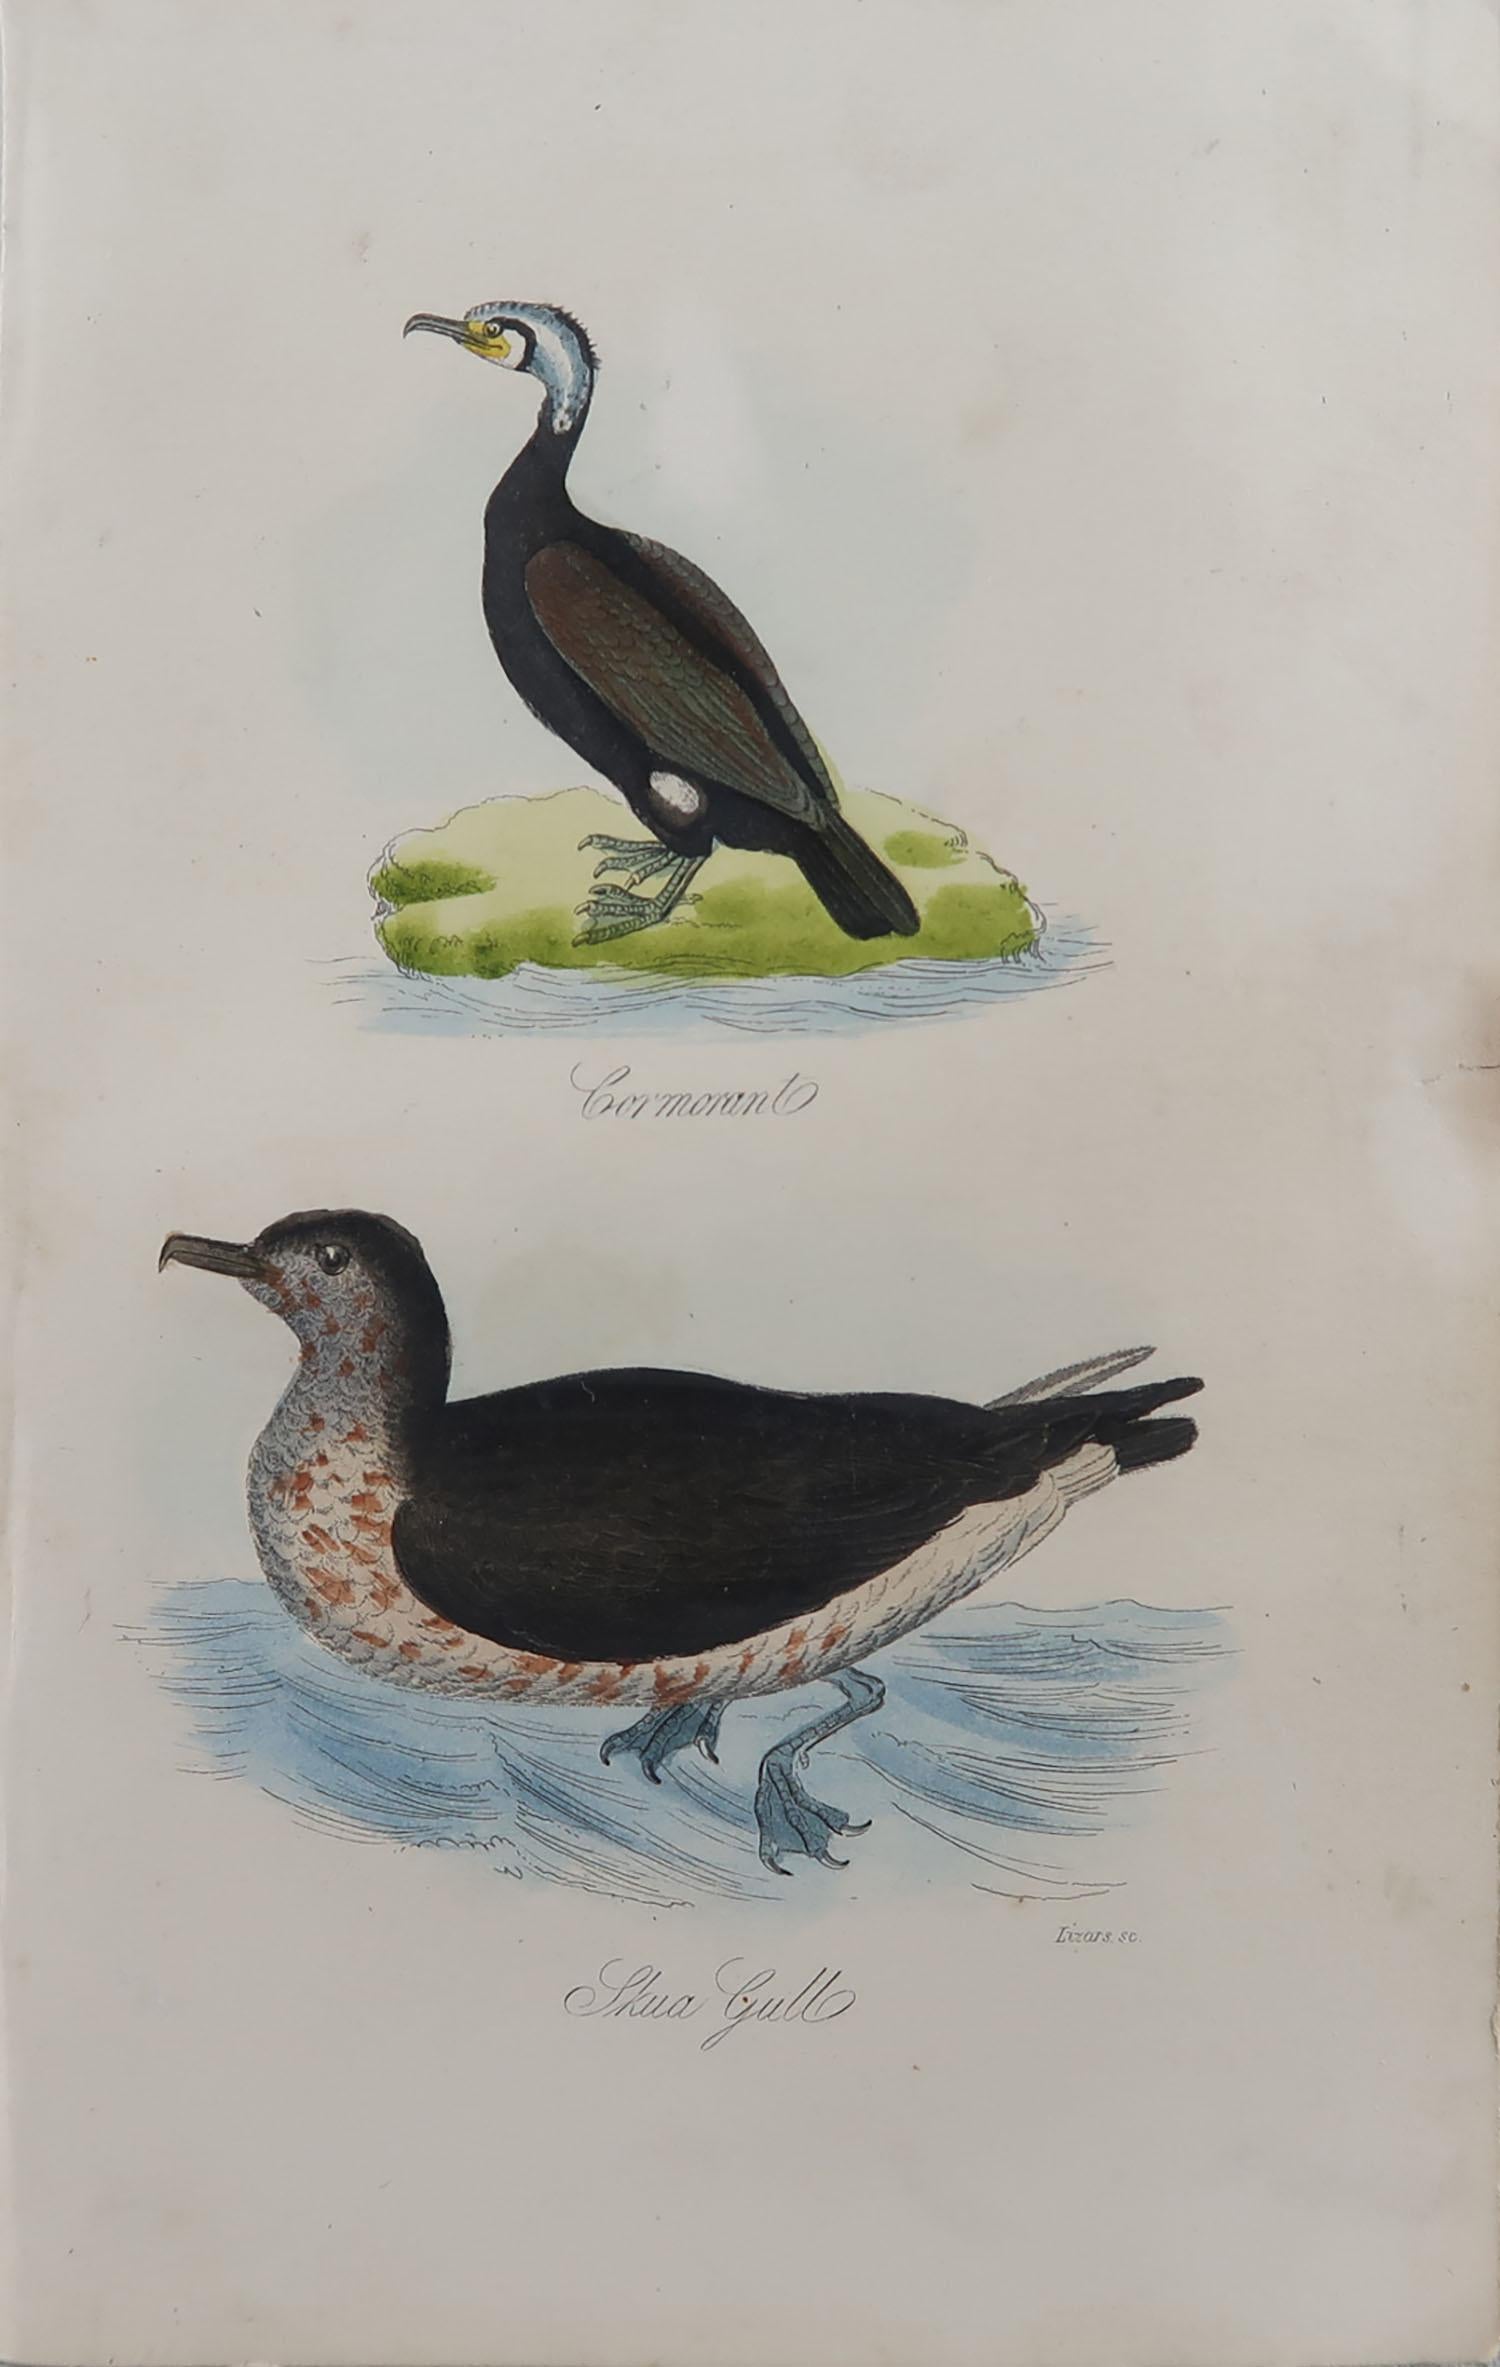 Great image of a cormorant and a skua gull

Unframed. It gives you the option of perhaps making a set up using your own choice of frames.

Lithograph heightened with gum Arabic.

Original color

Published, circa 1850

Free